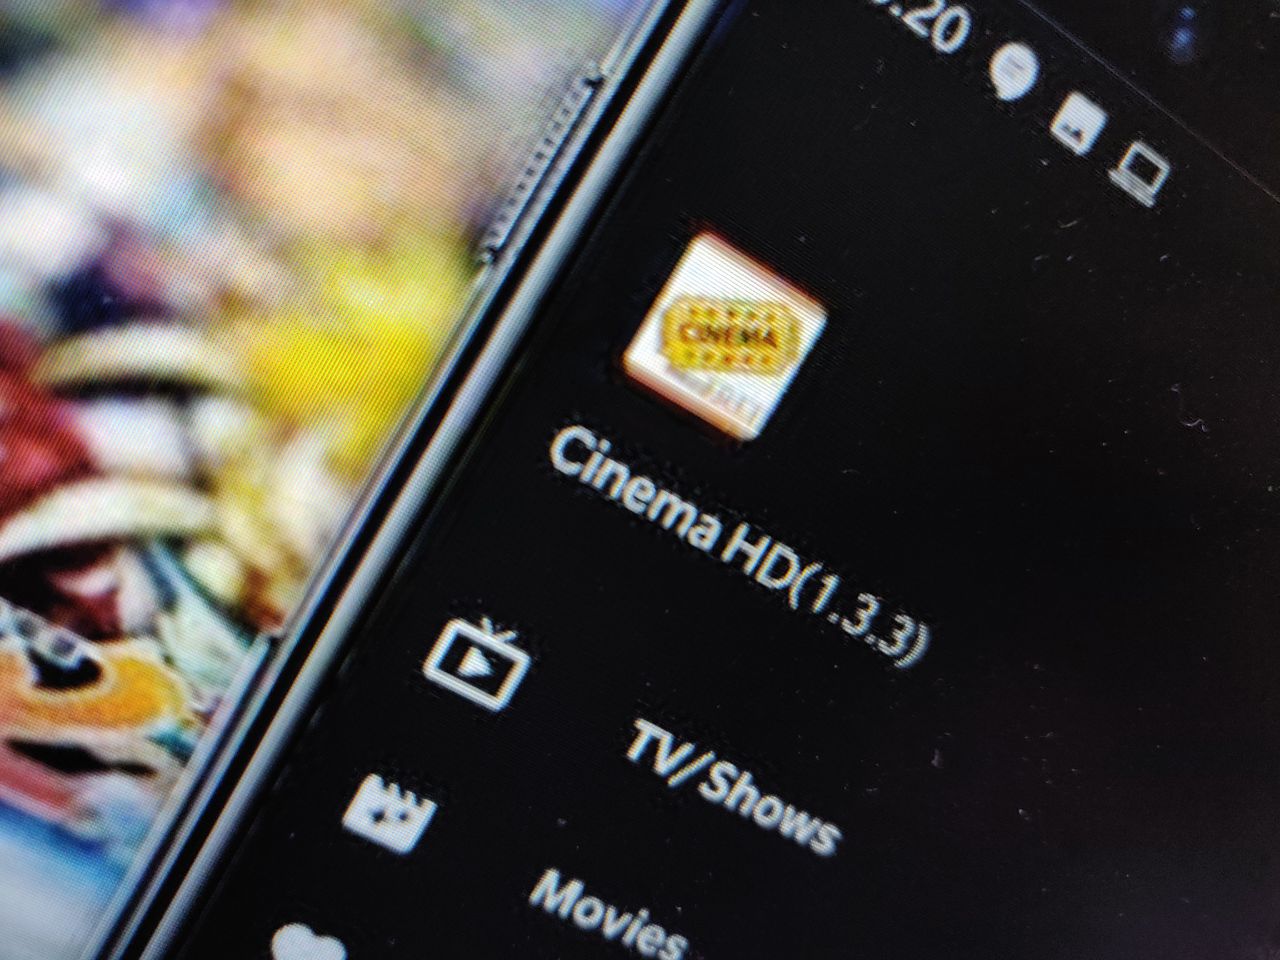 Cinema HD 1.4.3 not working on FireStick? Here are some workarounds